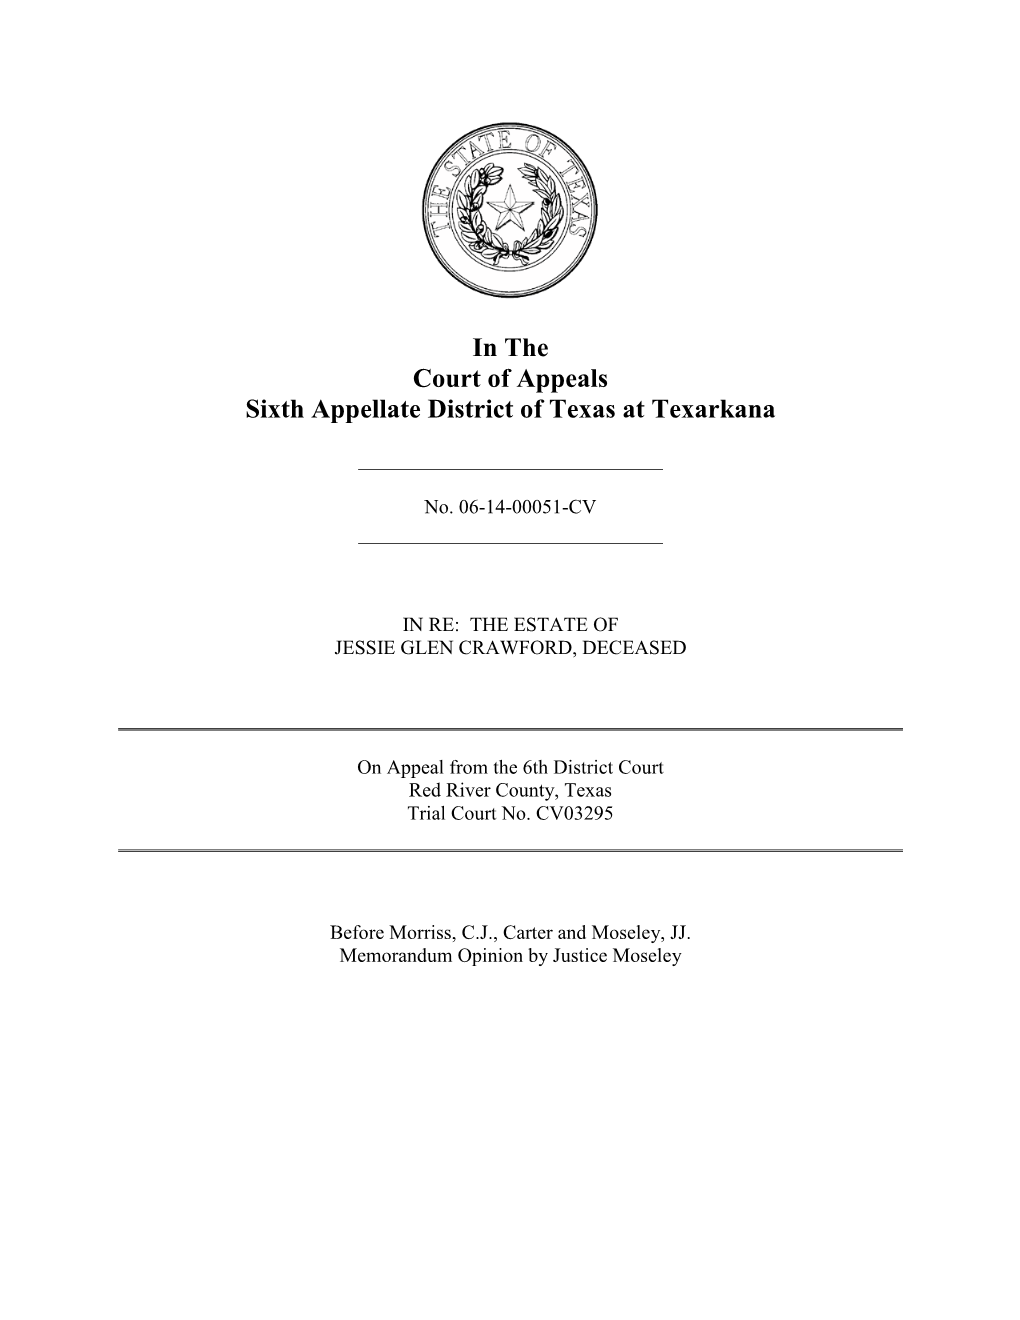 In the Court of Appeals Sixth Appellate District of Texas at Texarkana